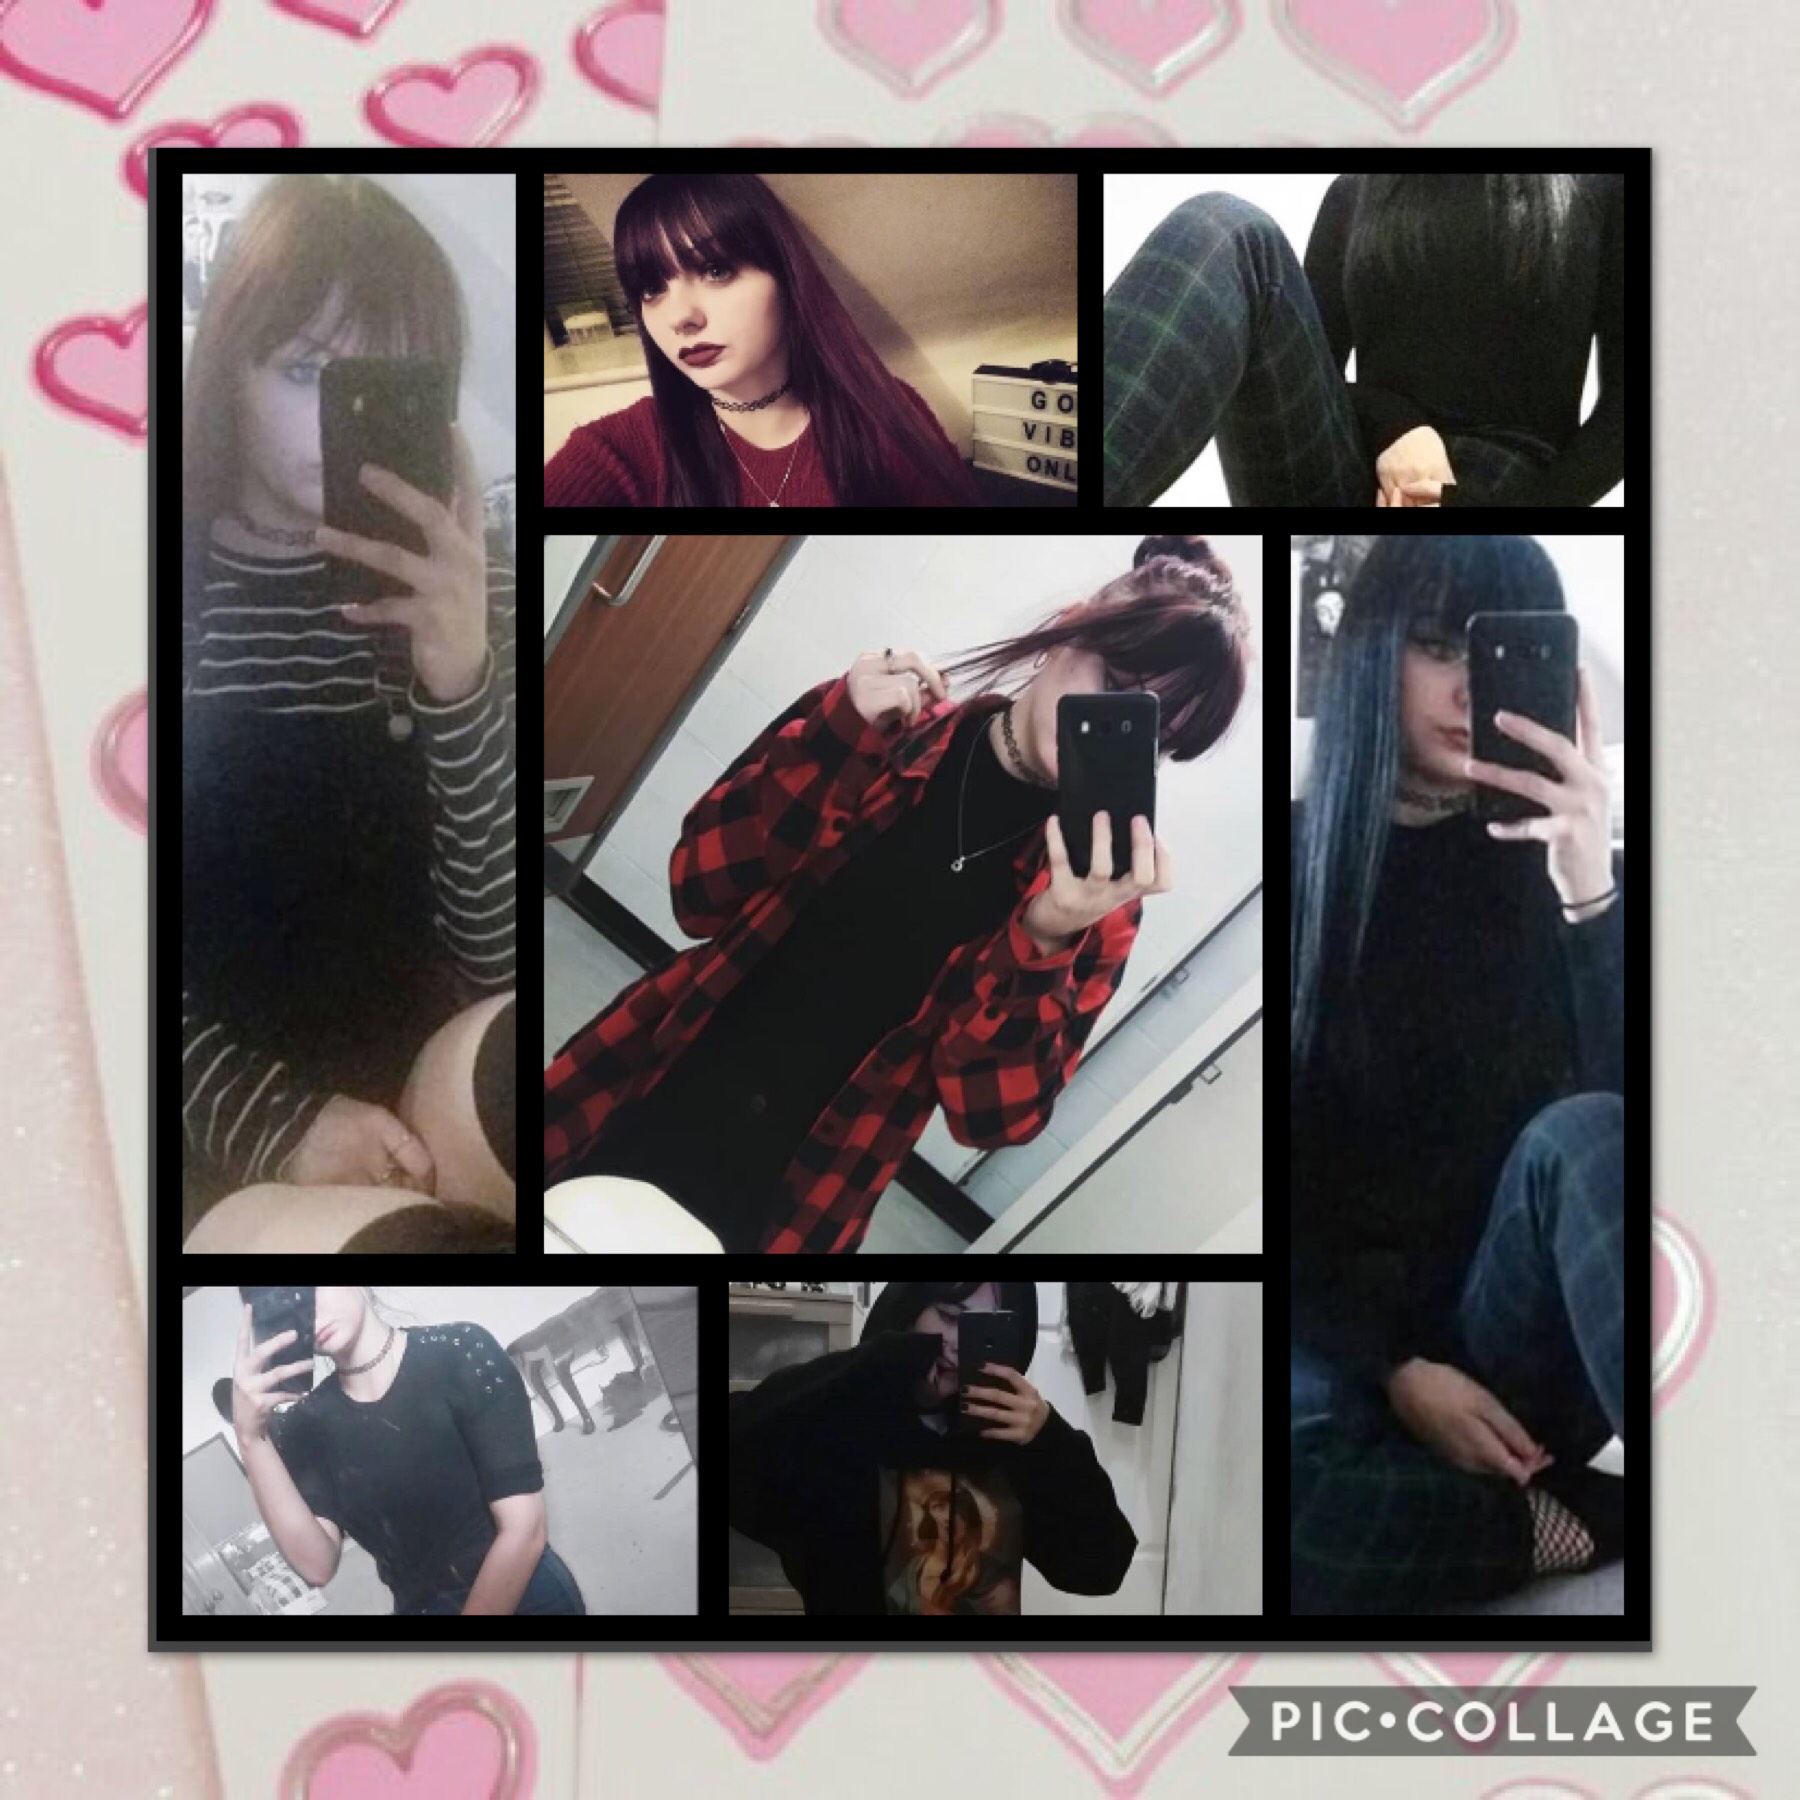 💗Tap💗

A collage of my beautiful girlfriend. 